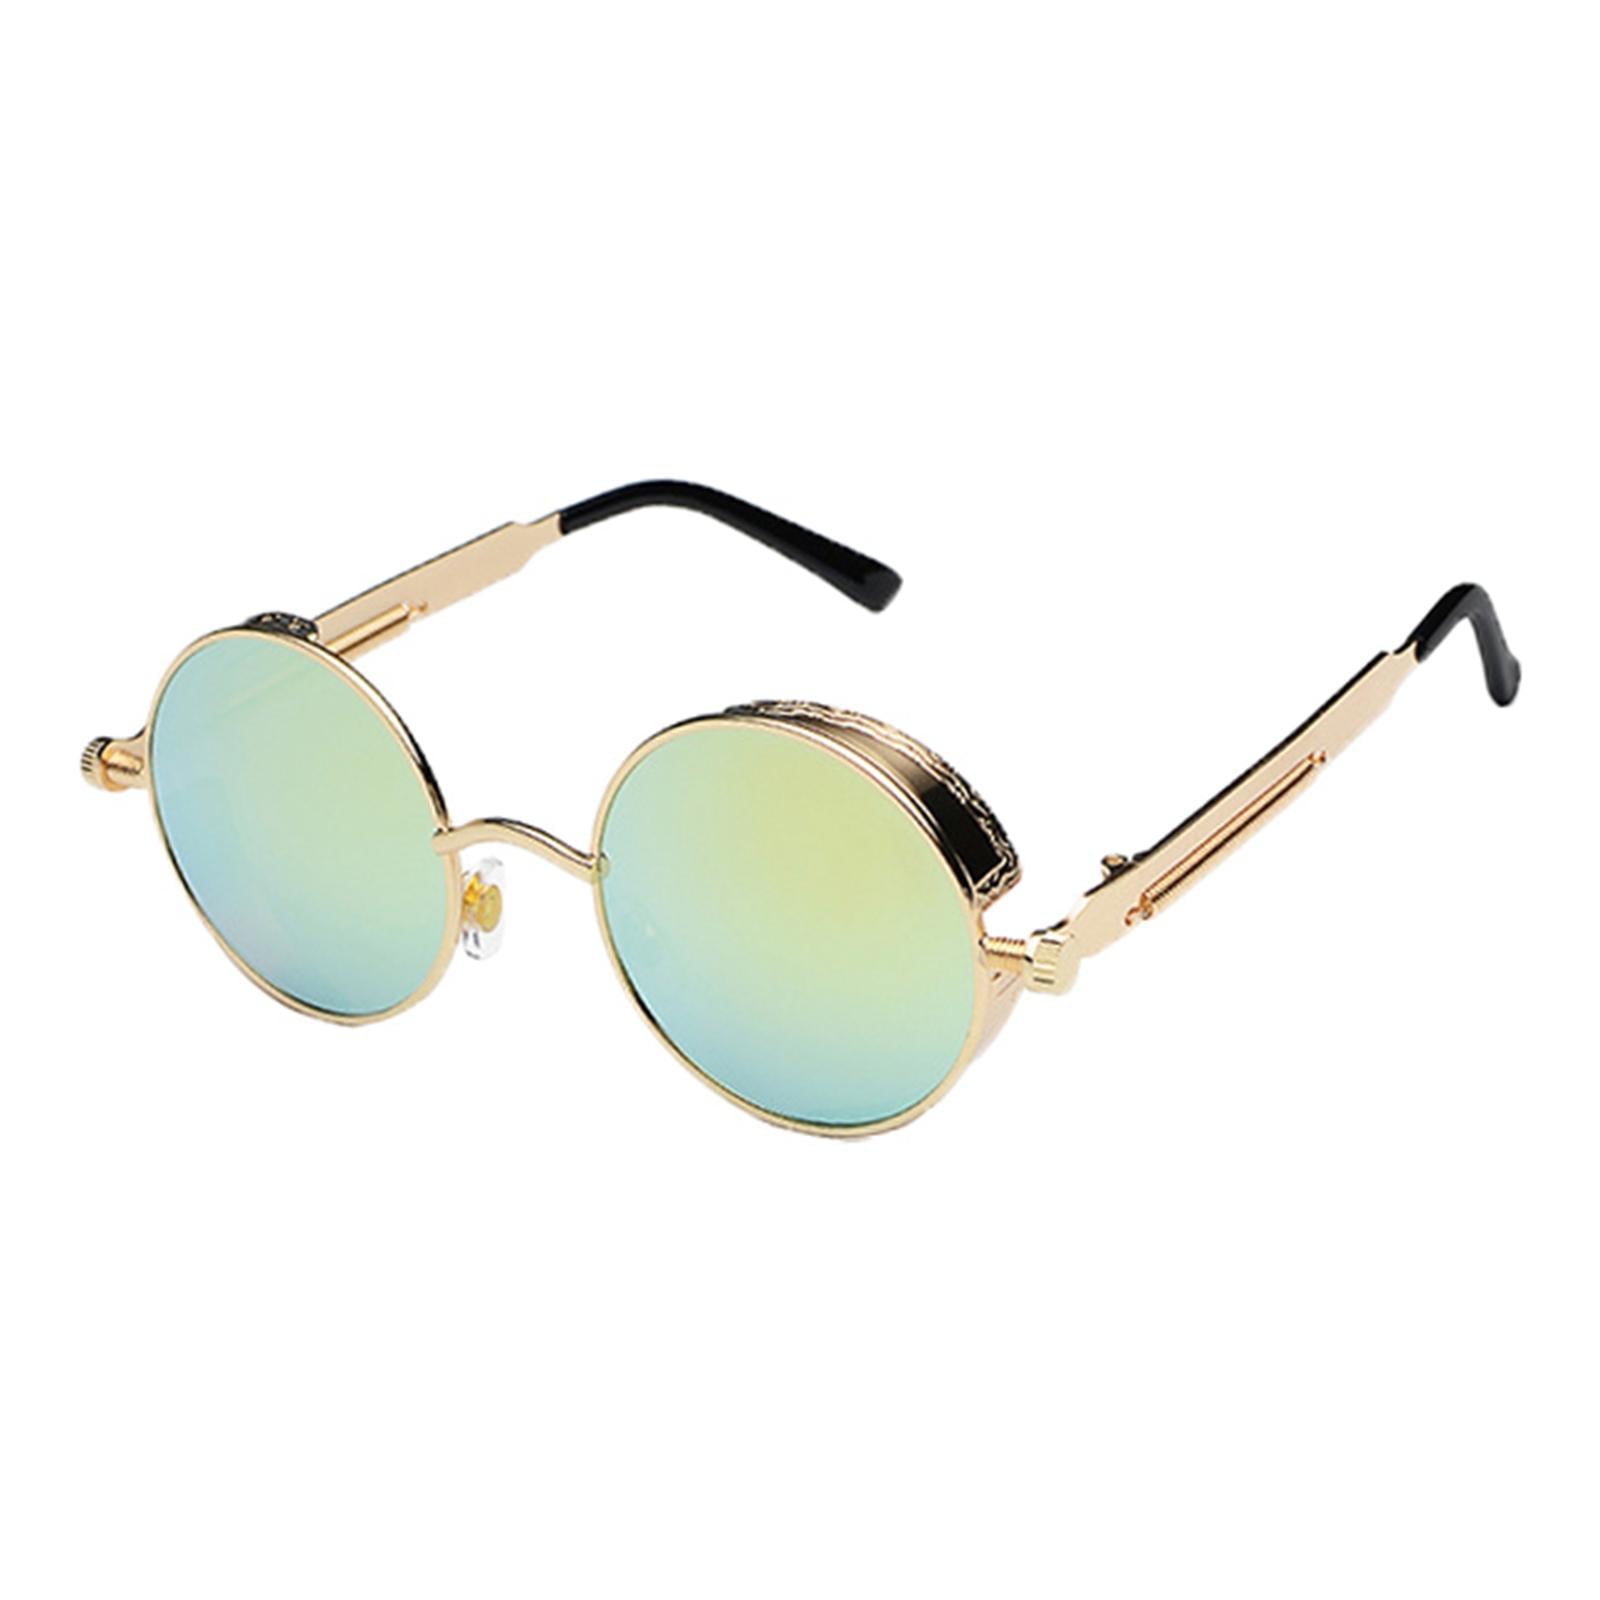 Chic Round Sunglasses Metal Protection Tinted Lens Eyewear Shades Glasses for Outdoor Vacation Driving Fishing Walmart.com